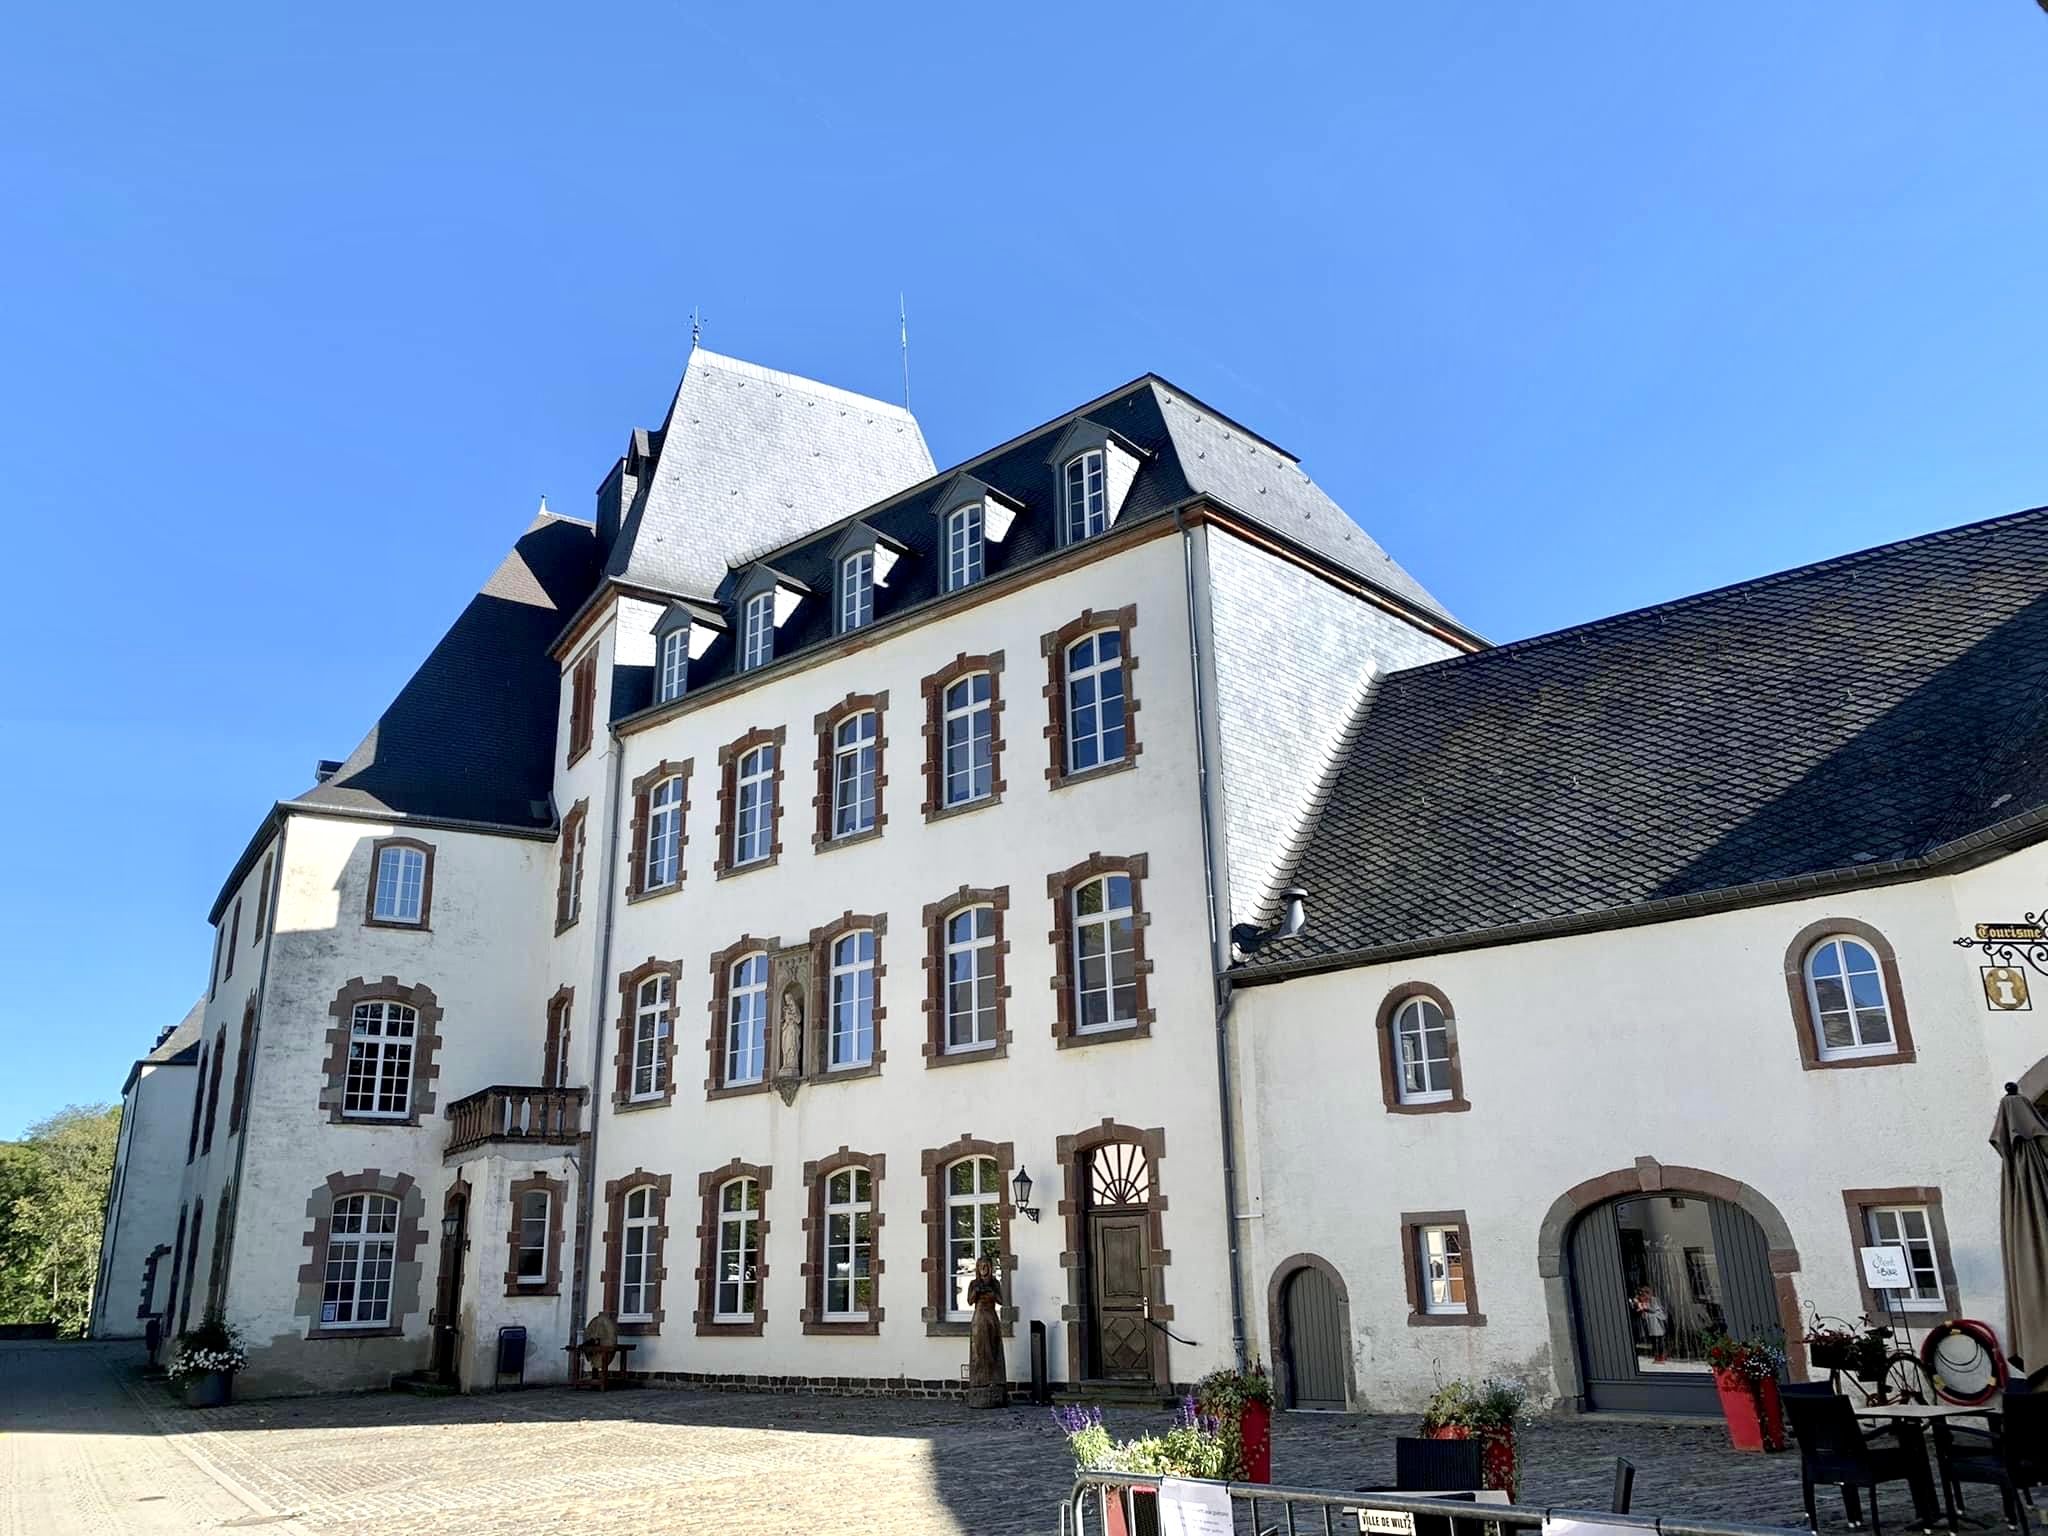 The prestigious Chateau Wiltz, a captivating historical landmark in Luxembourg that is now EBU's Campus